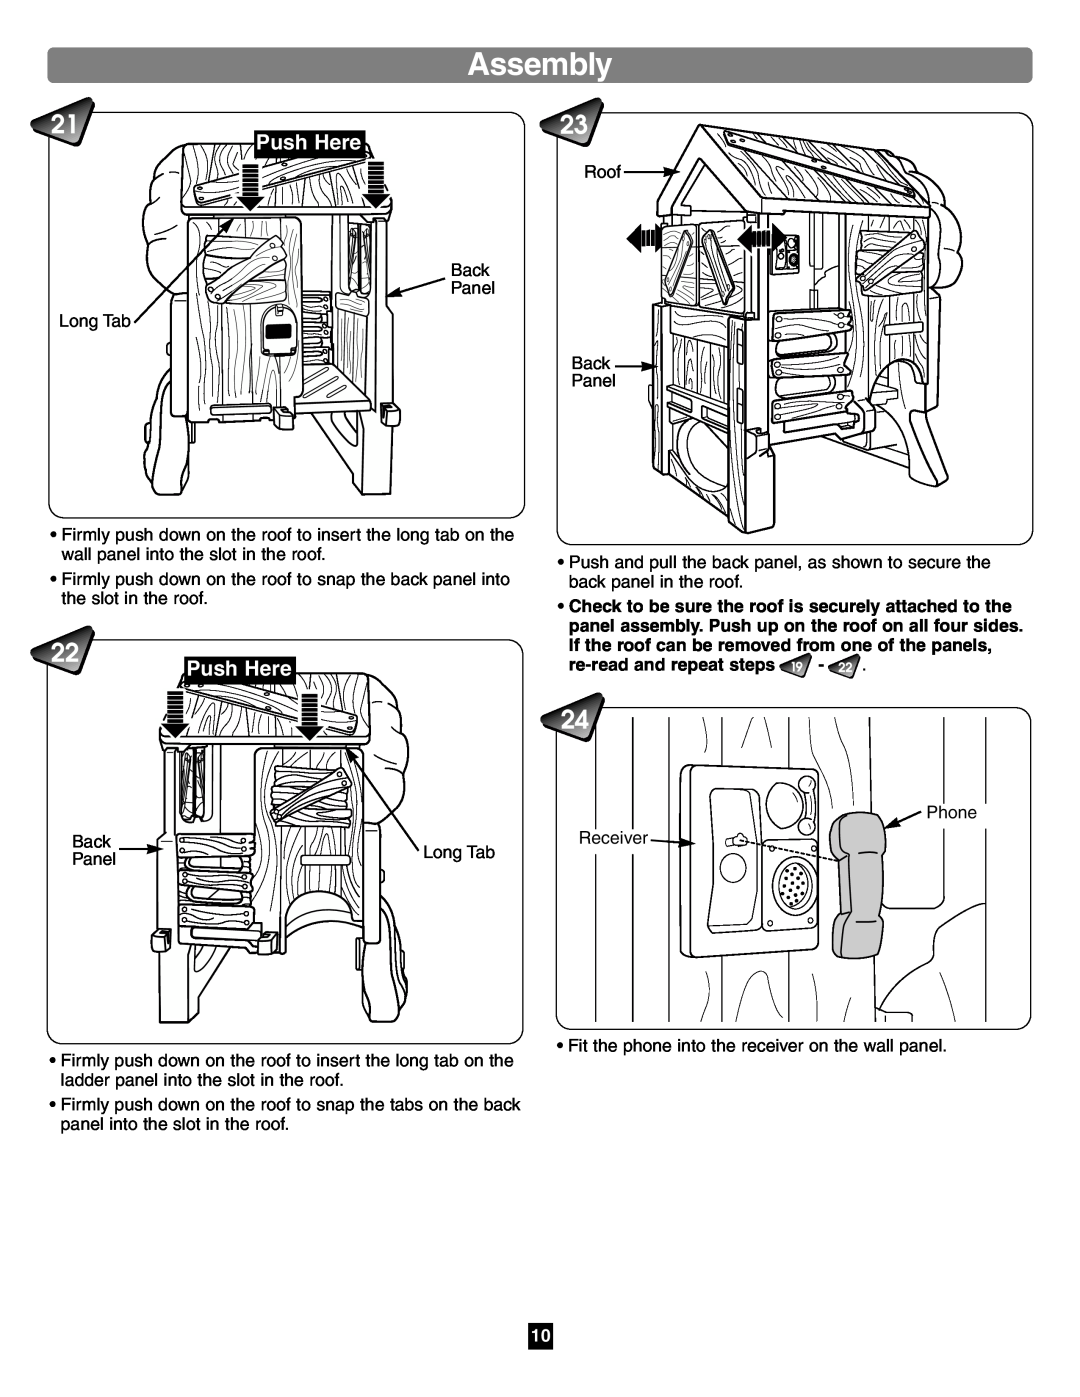 Fisher-Price 75972 manual Assembly, Push Here, If the roof can be removed from one of the panels, re-read and repeat steps 